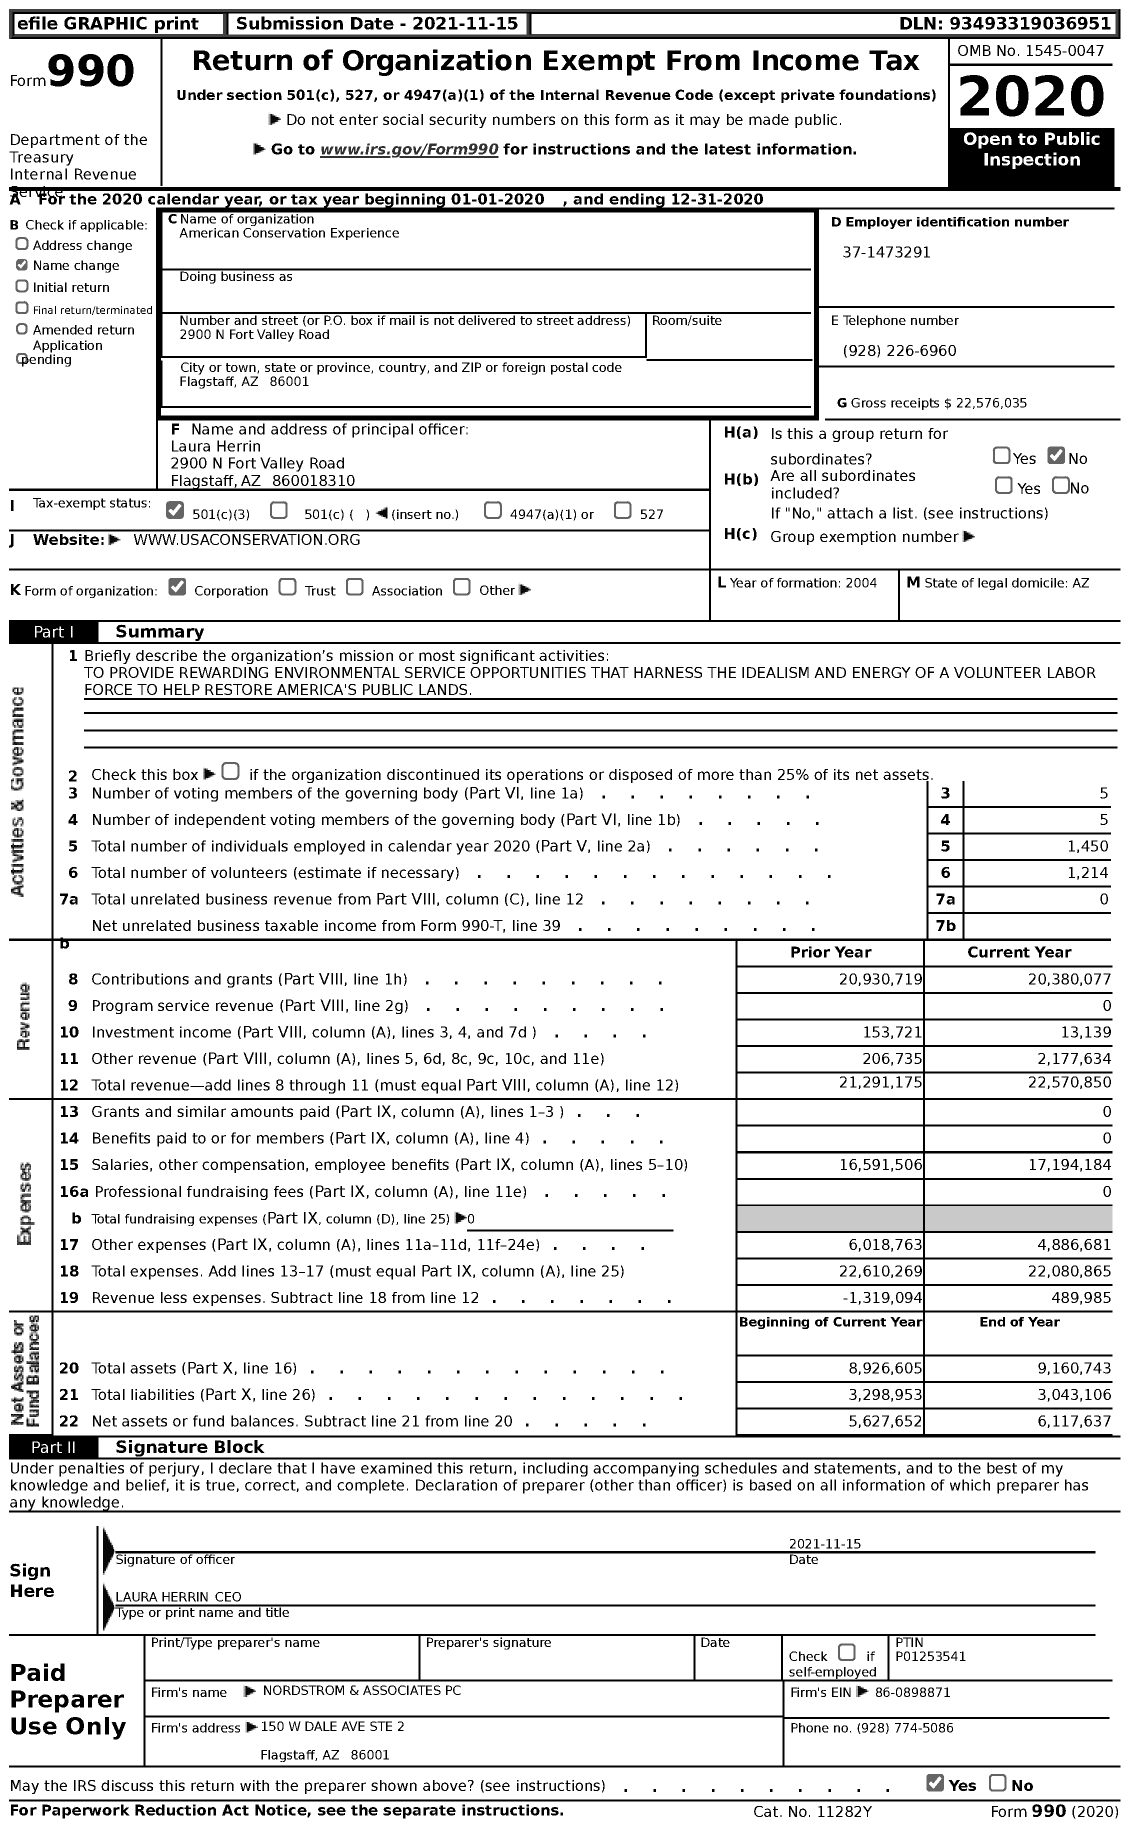 Image of first page of 2020 Form 990 for American Conservation Experience (ACE)